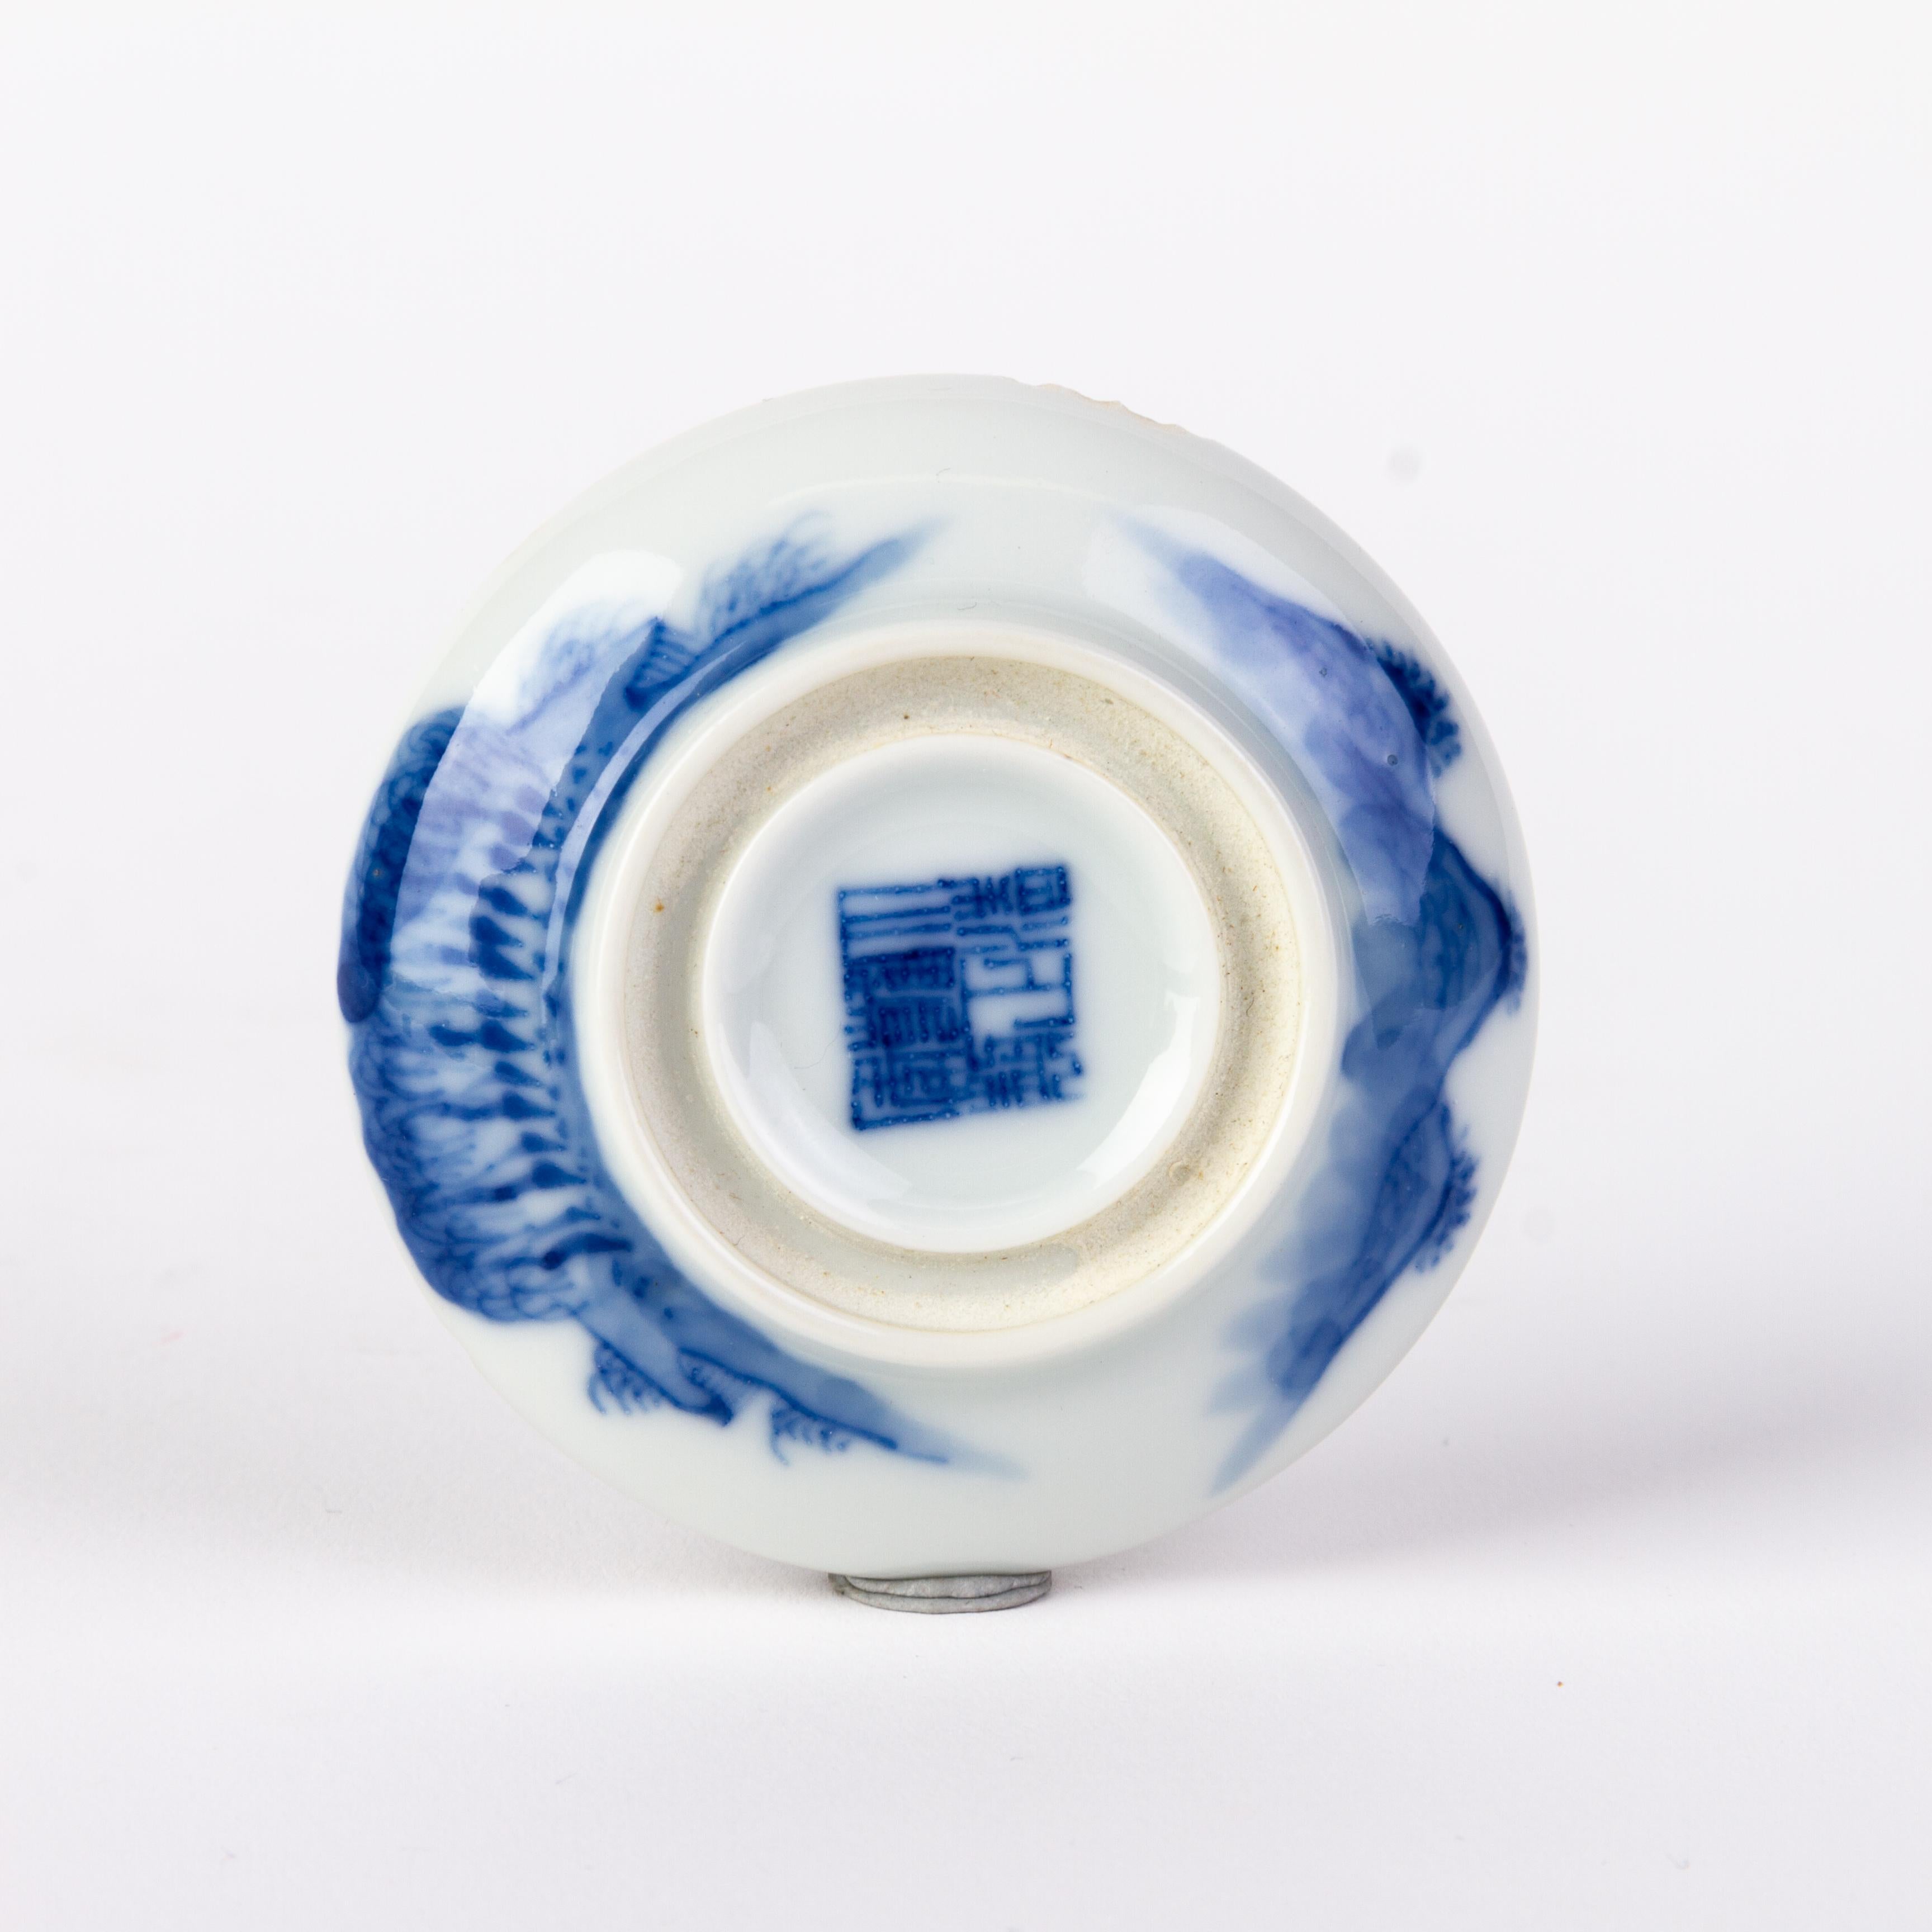 Chinese Daoguang Blue & White Porcelain Lidded Box with Seal Mark 19th Century For Sale 1